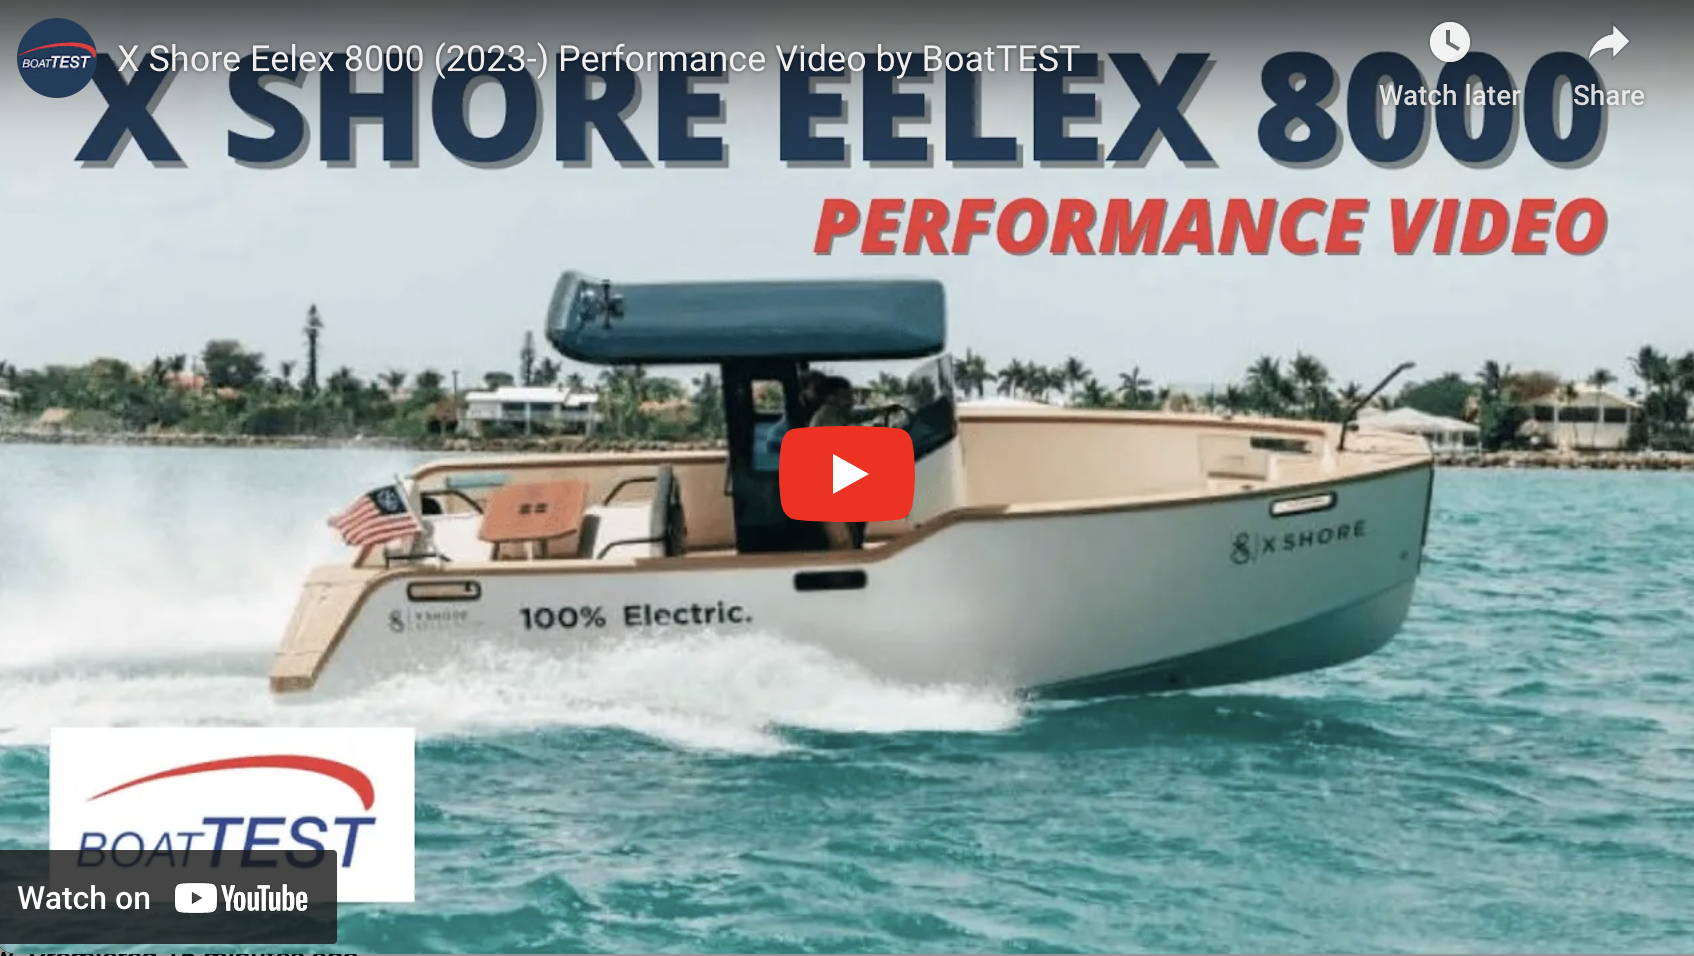 X Shore Eelex 8000 (2023-) Performance Video by BoatTEST